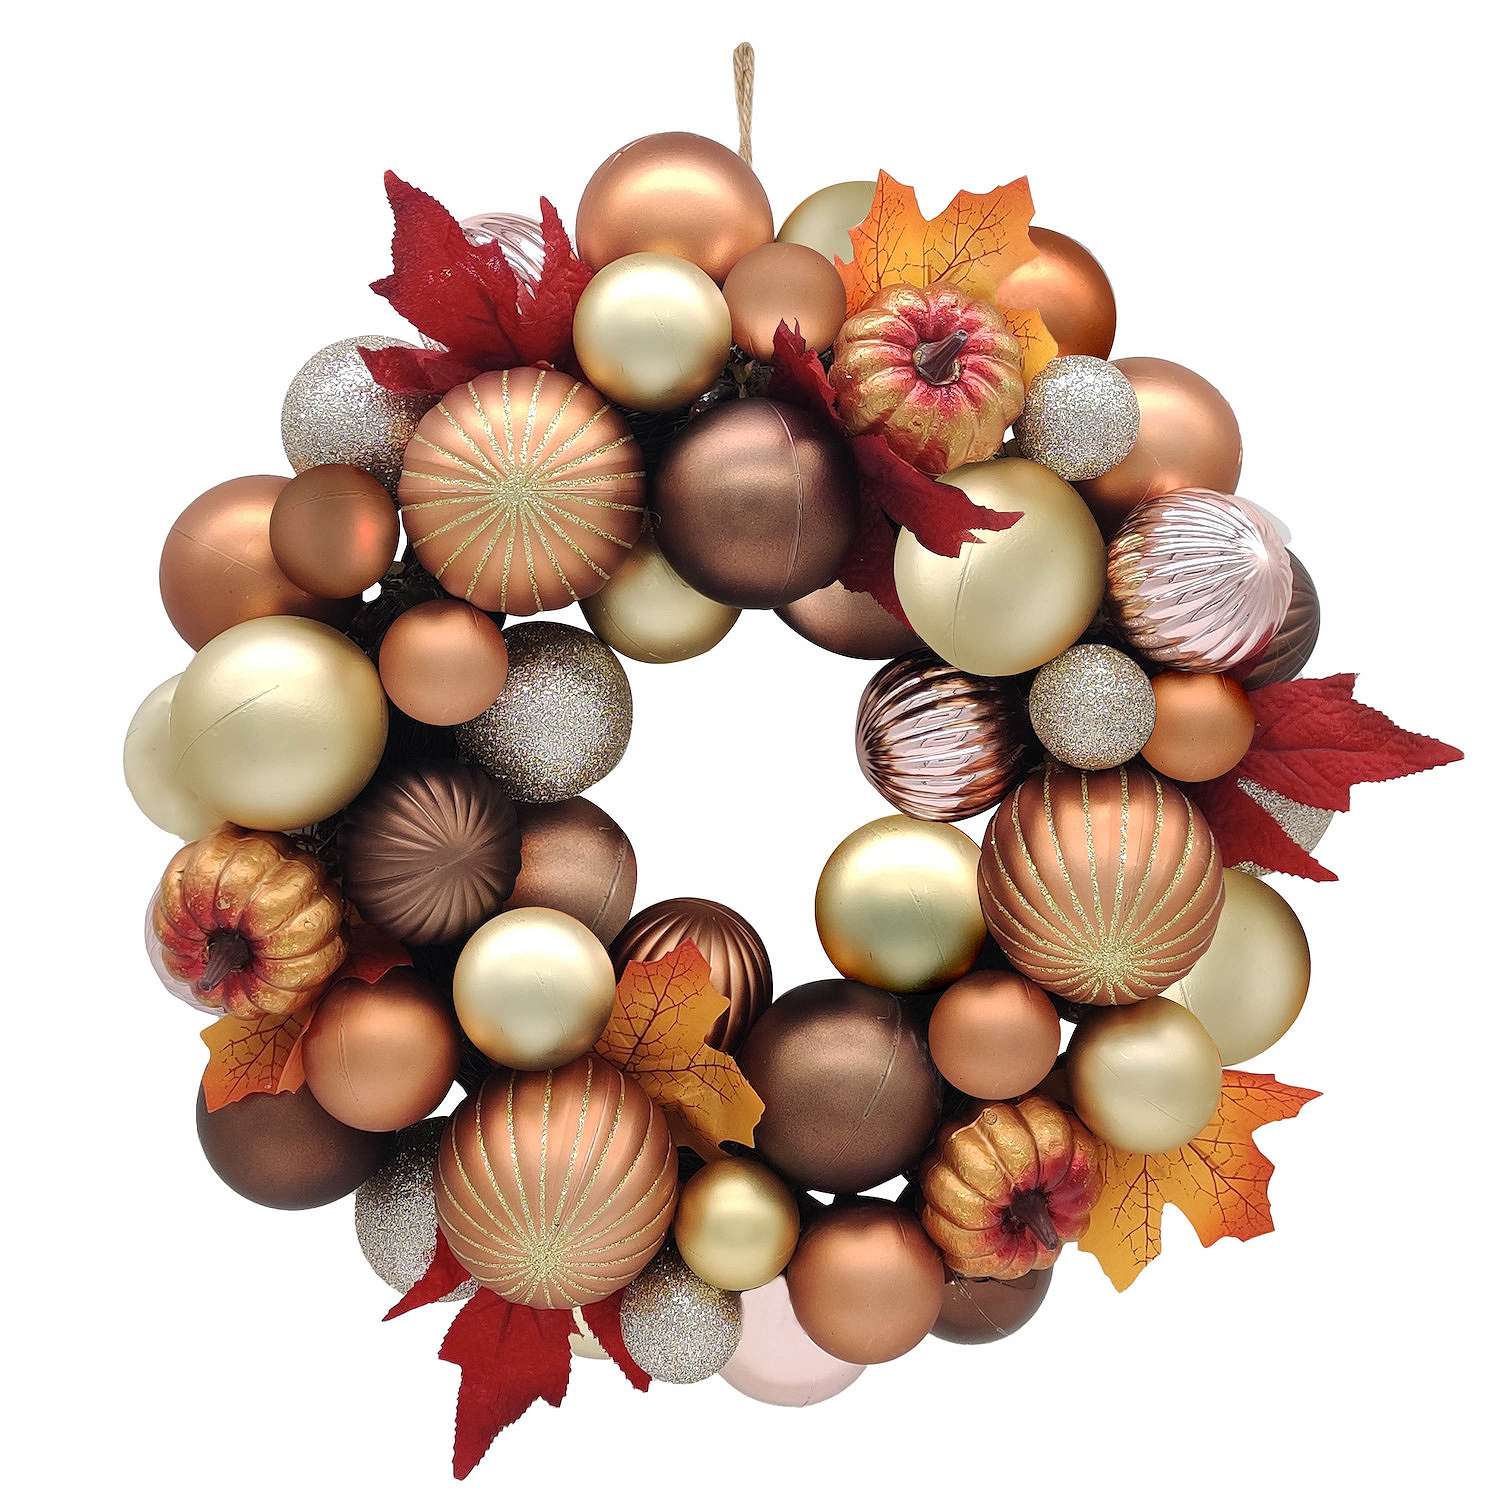 16" Celebrate Together Fall Wall Decor Bauble Wreath $24 + Free Store Pick Up at Kohl's or Free S/H on $49+